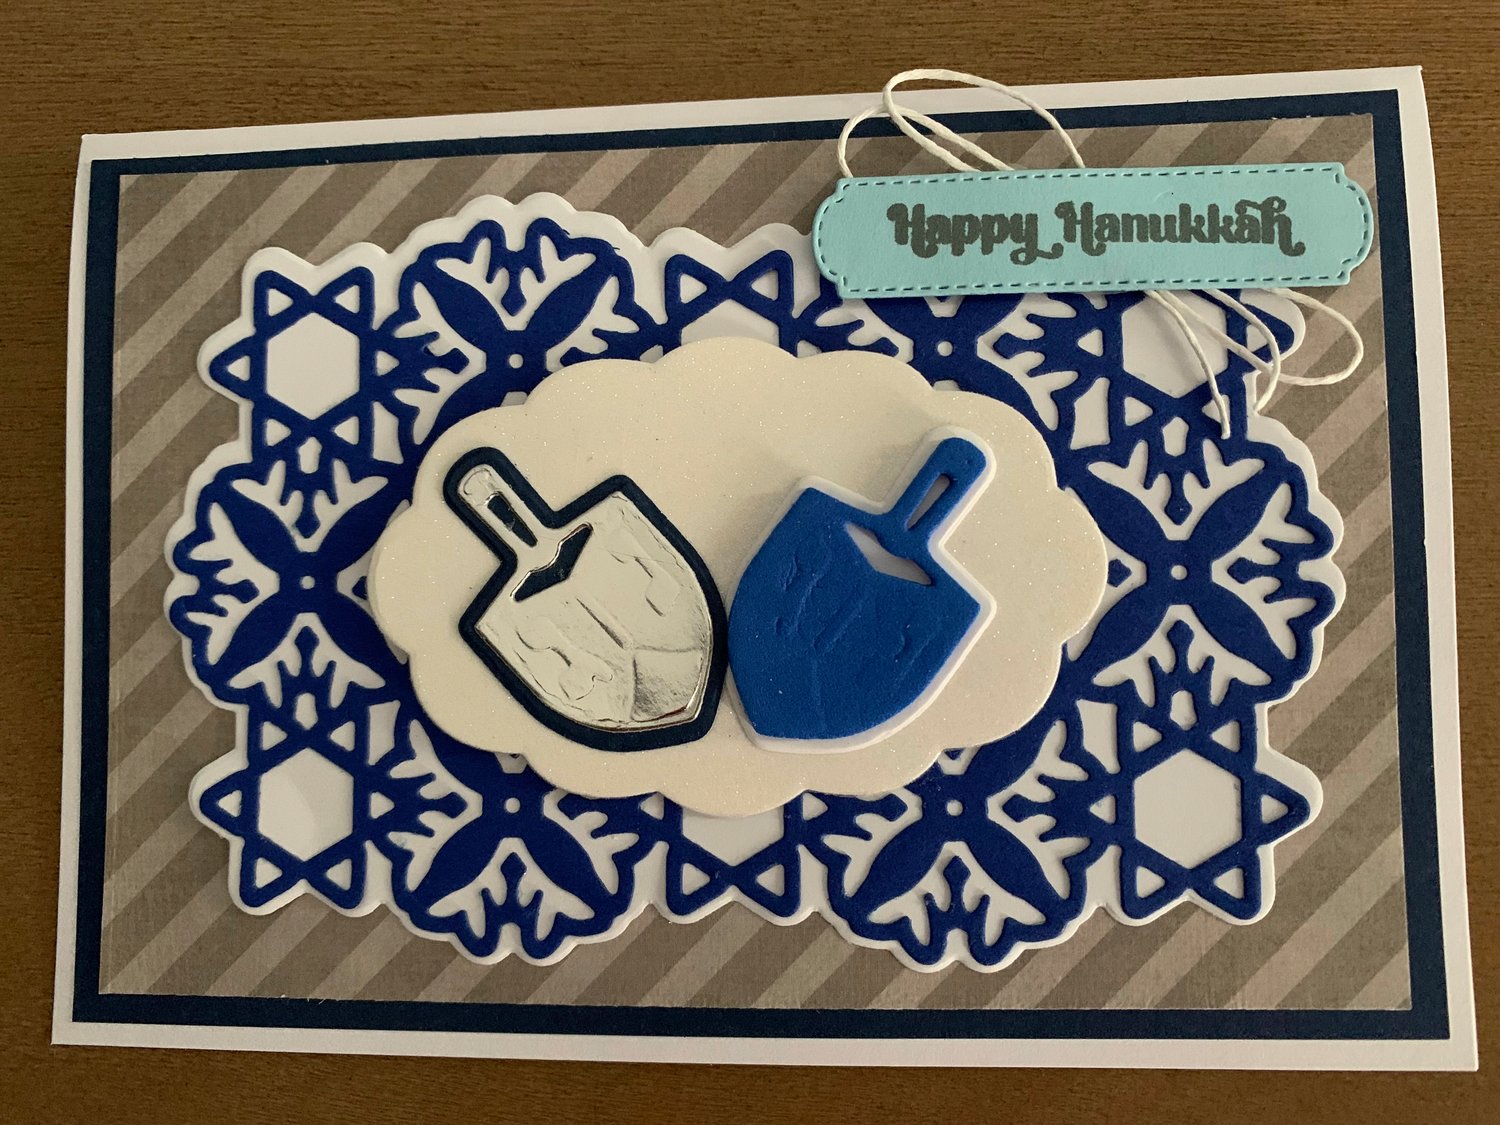 This image provided by Tiziana Fox shows a handmade Hanukkah card. Handmade holiday cards can be gifts in themselves for both maker and receiver. They're a way to express creativity and connection. And gathering to make them can be a nice social activity. (Tiziana Fox via AP)